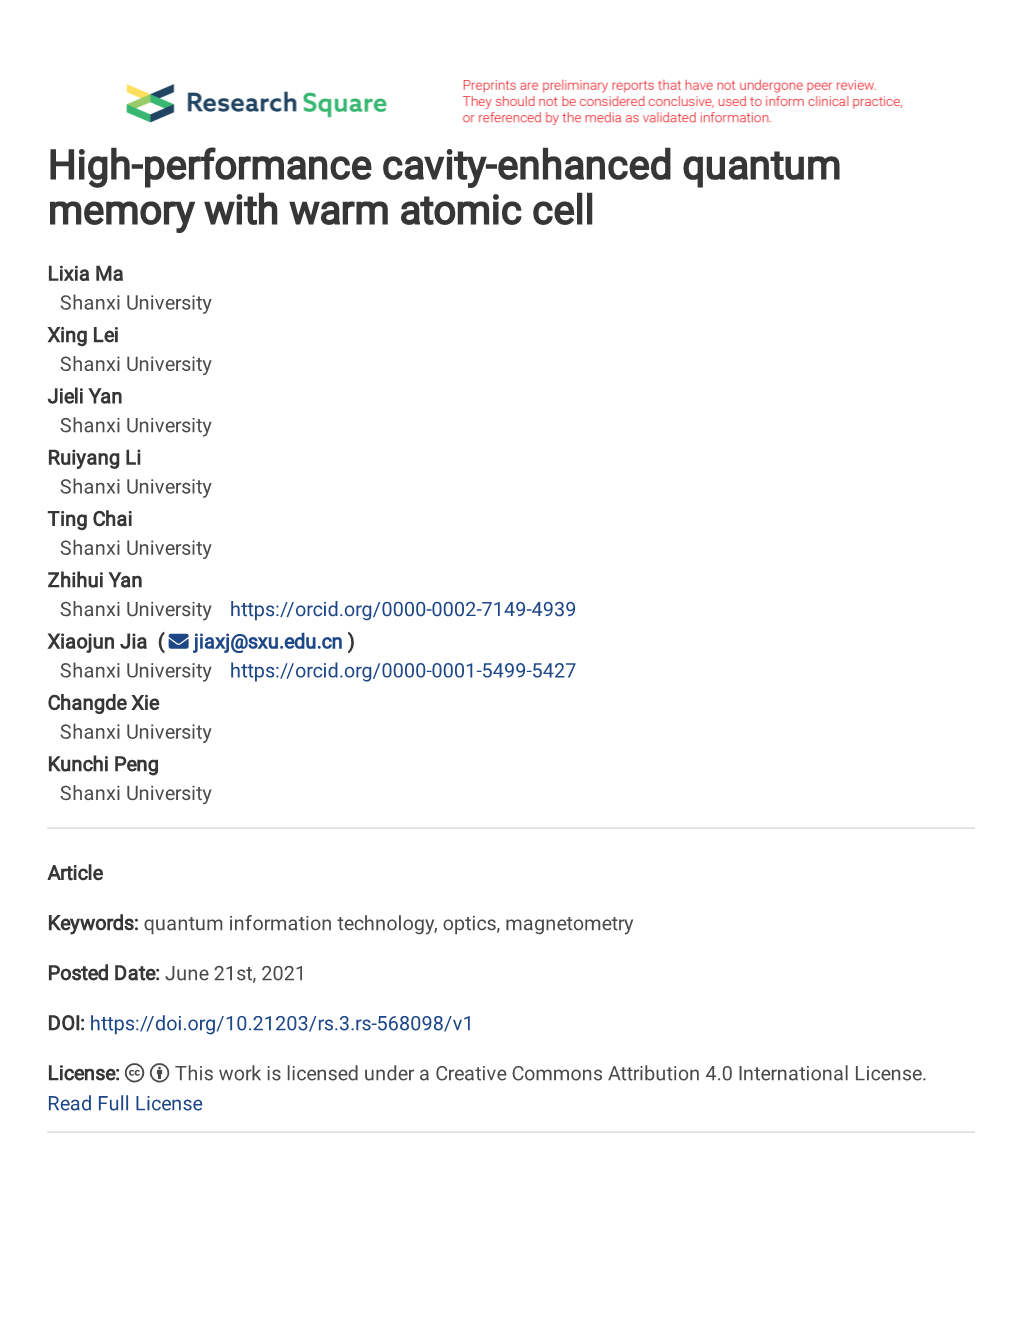 High-Performance Cavity-Enhanced Quantum Memory with Warm Atomic Cell